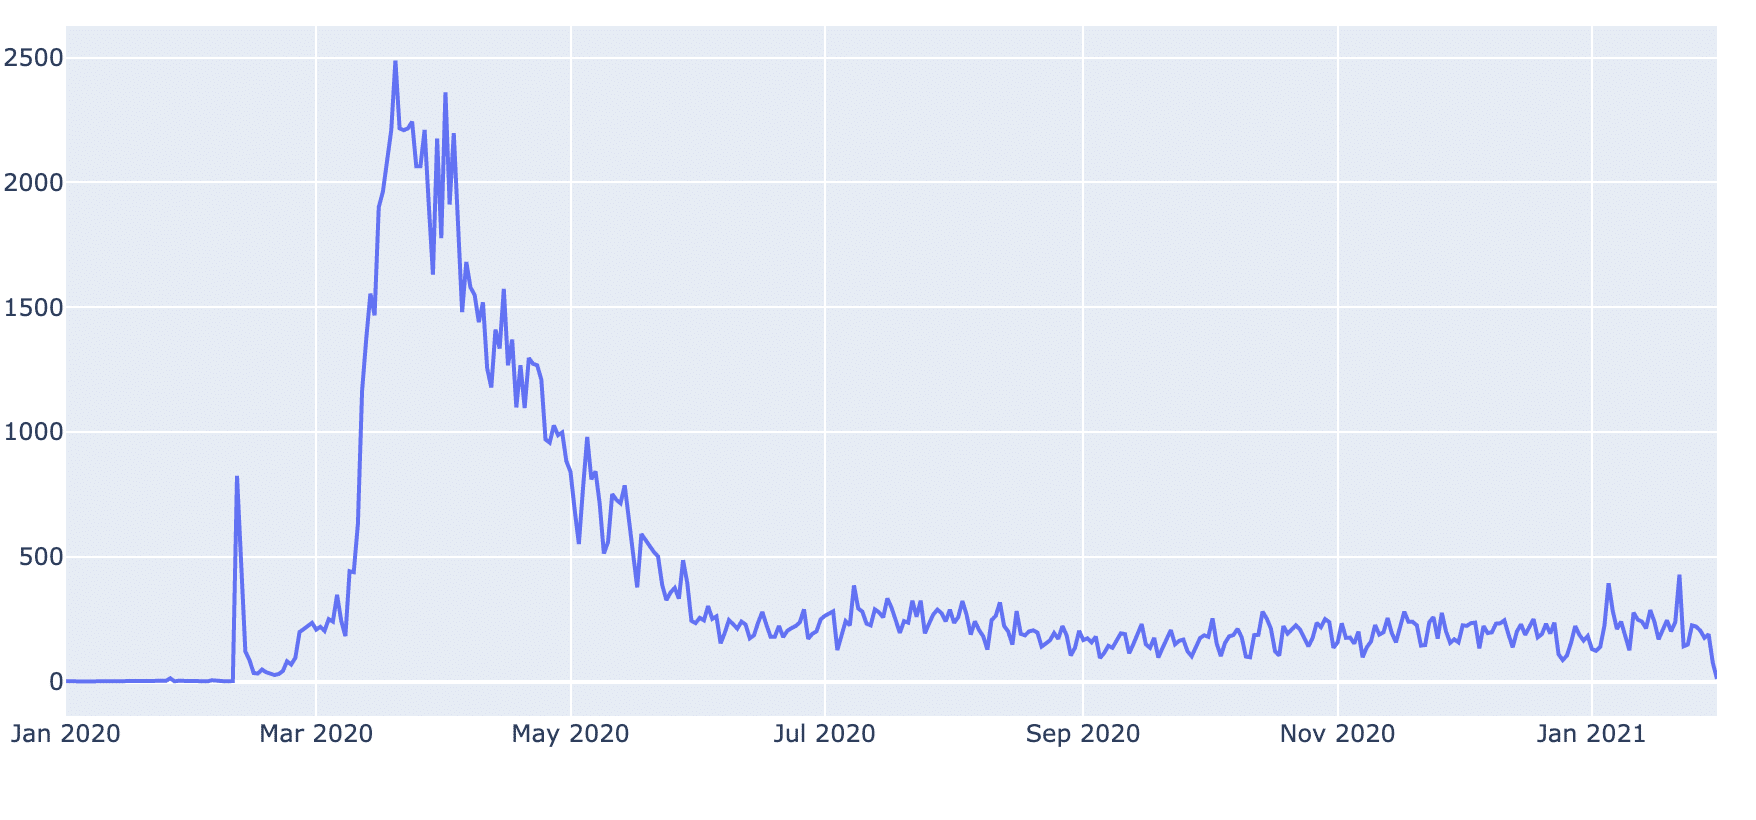 Plot of Term “covid” in Domains Since January 2020